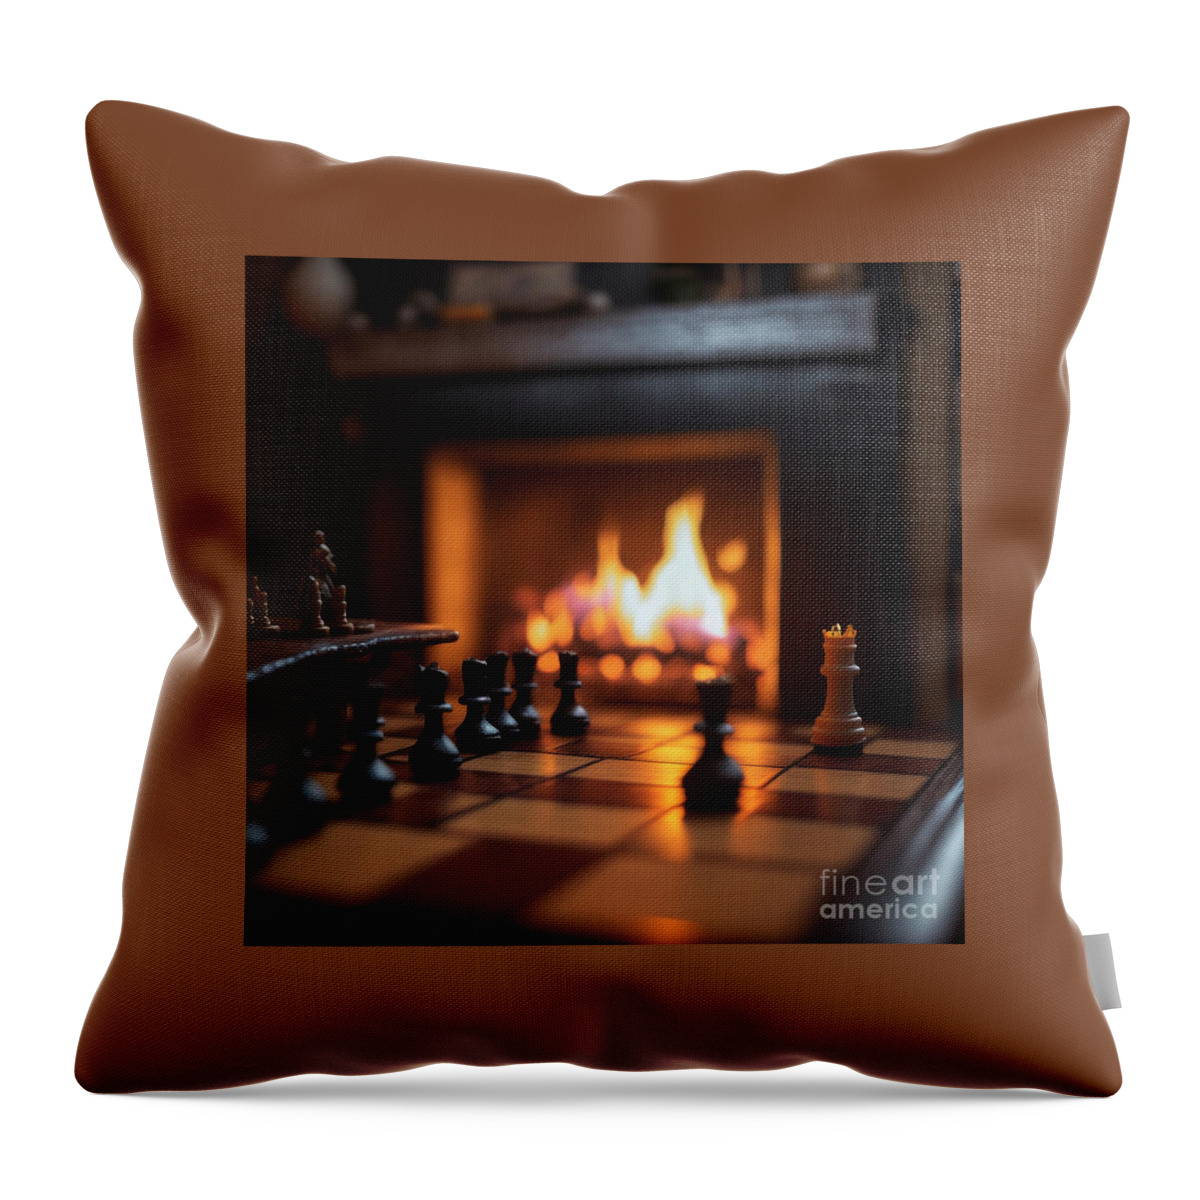 Chess Throw Pillow featuring the mixed media Chess By The Fire by Jay Schankman